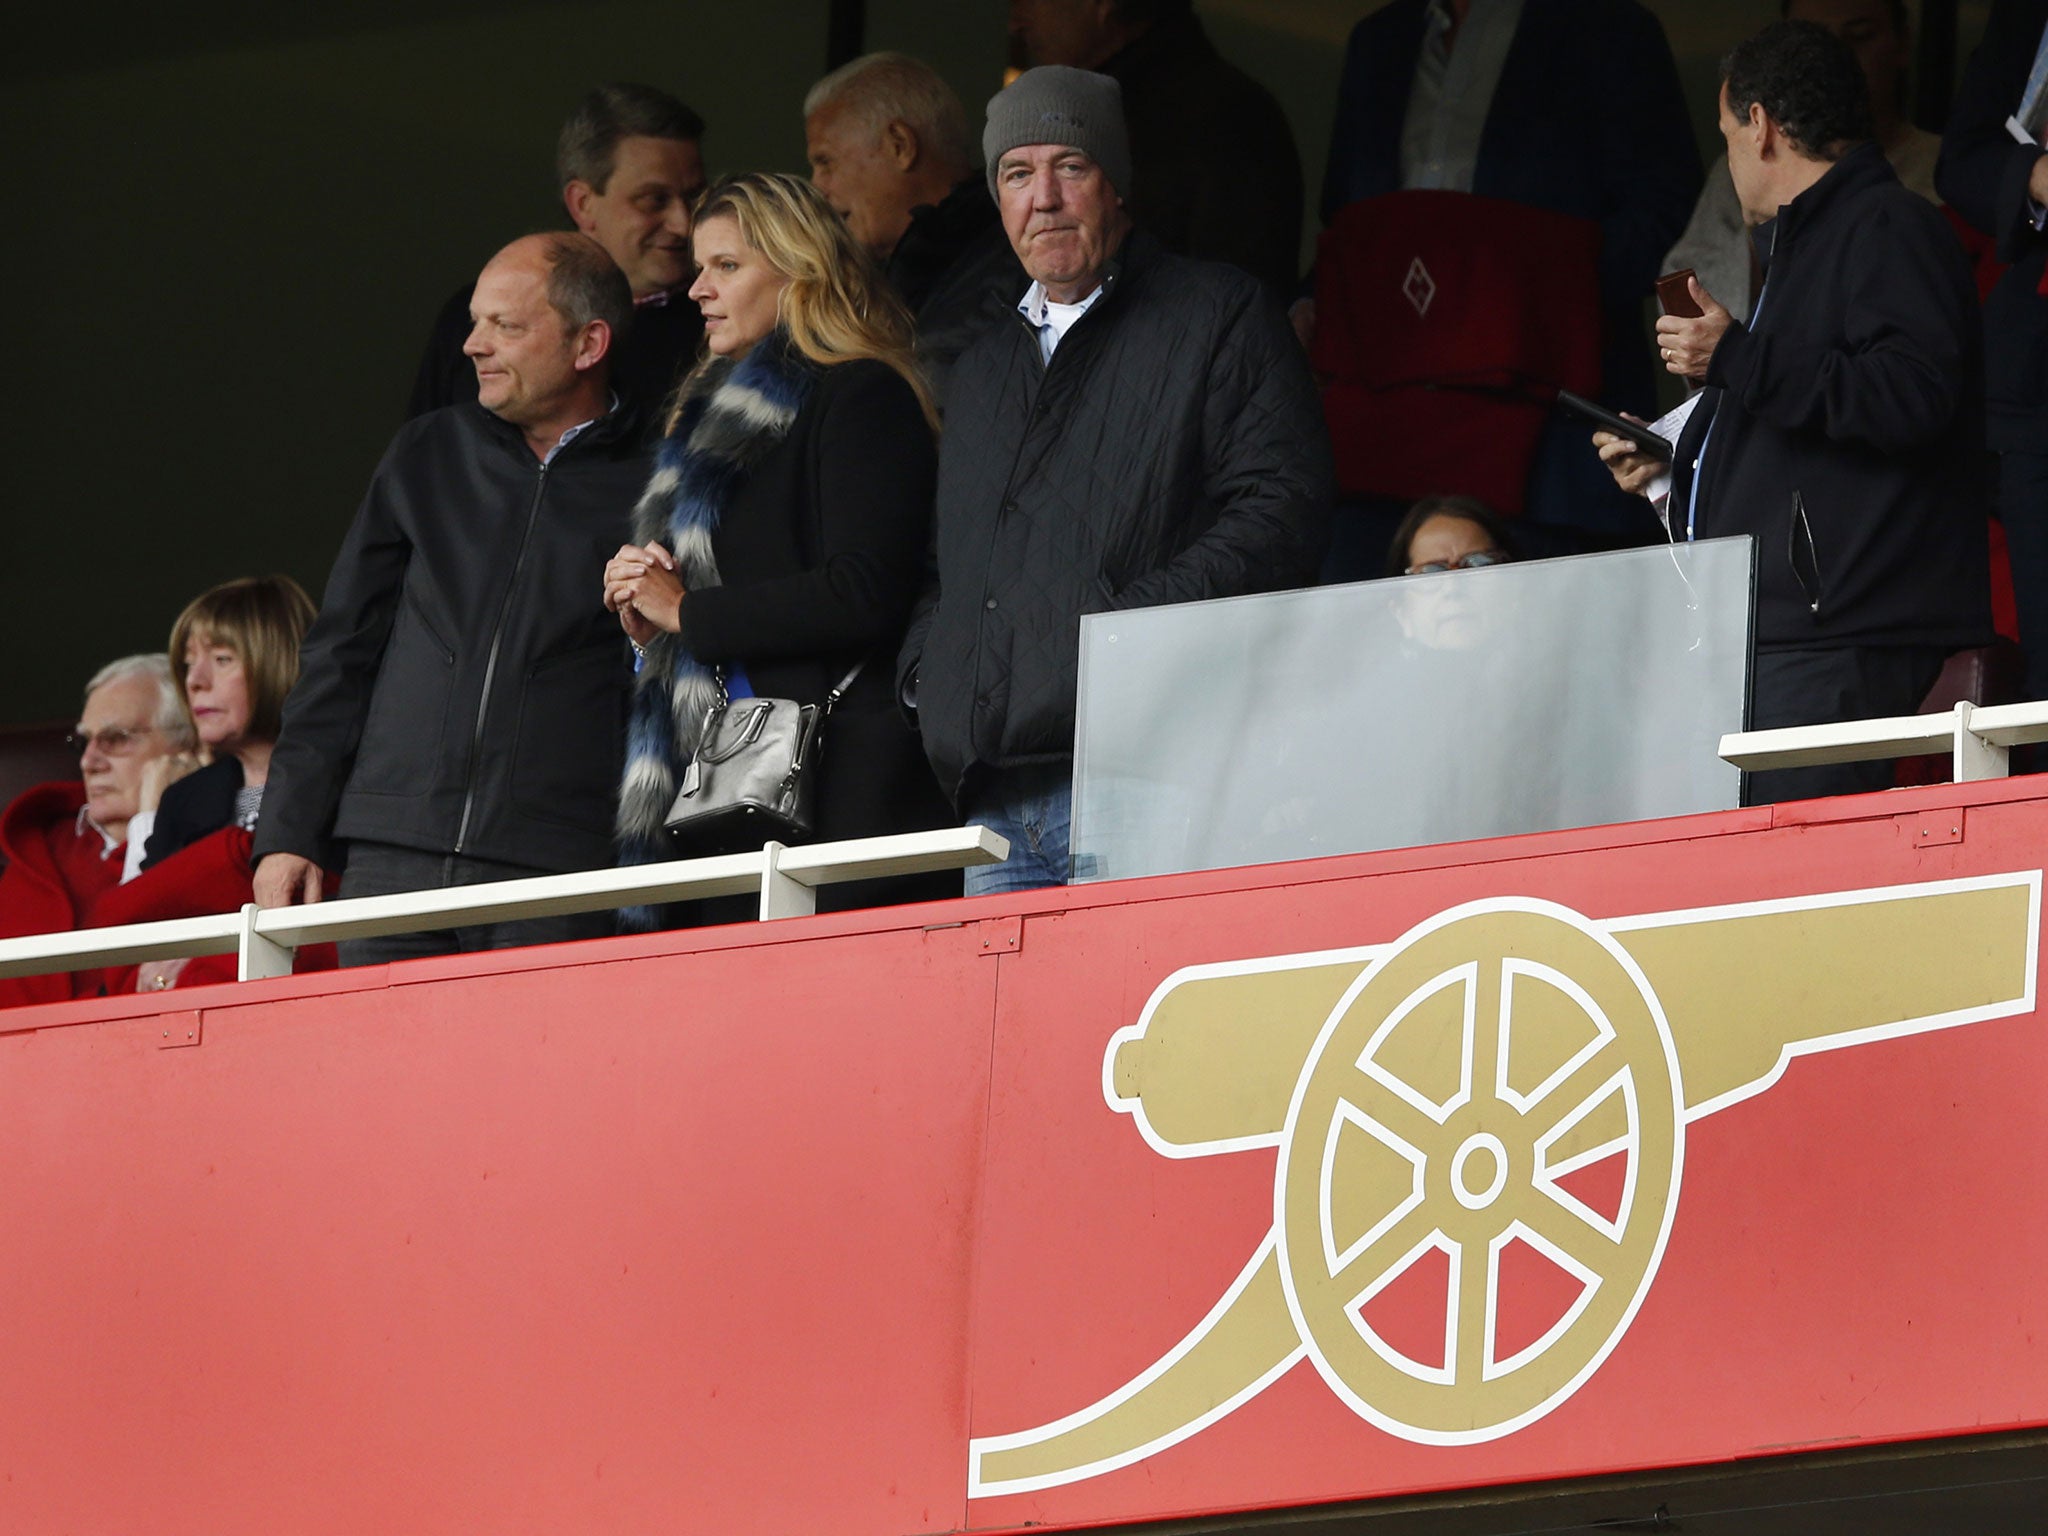 TV presenter Jeremy Clarkson waiting in the stands before the Arsenal vs Chelsea football match at the Emirates Stadium